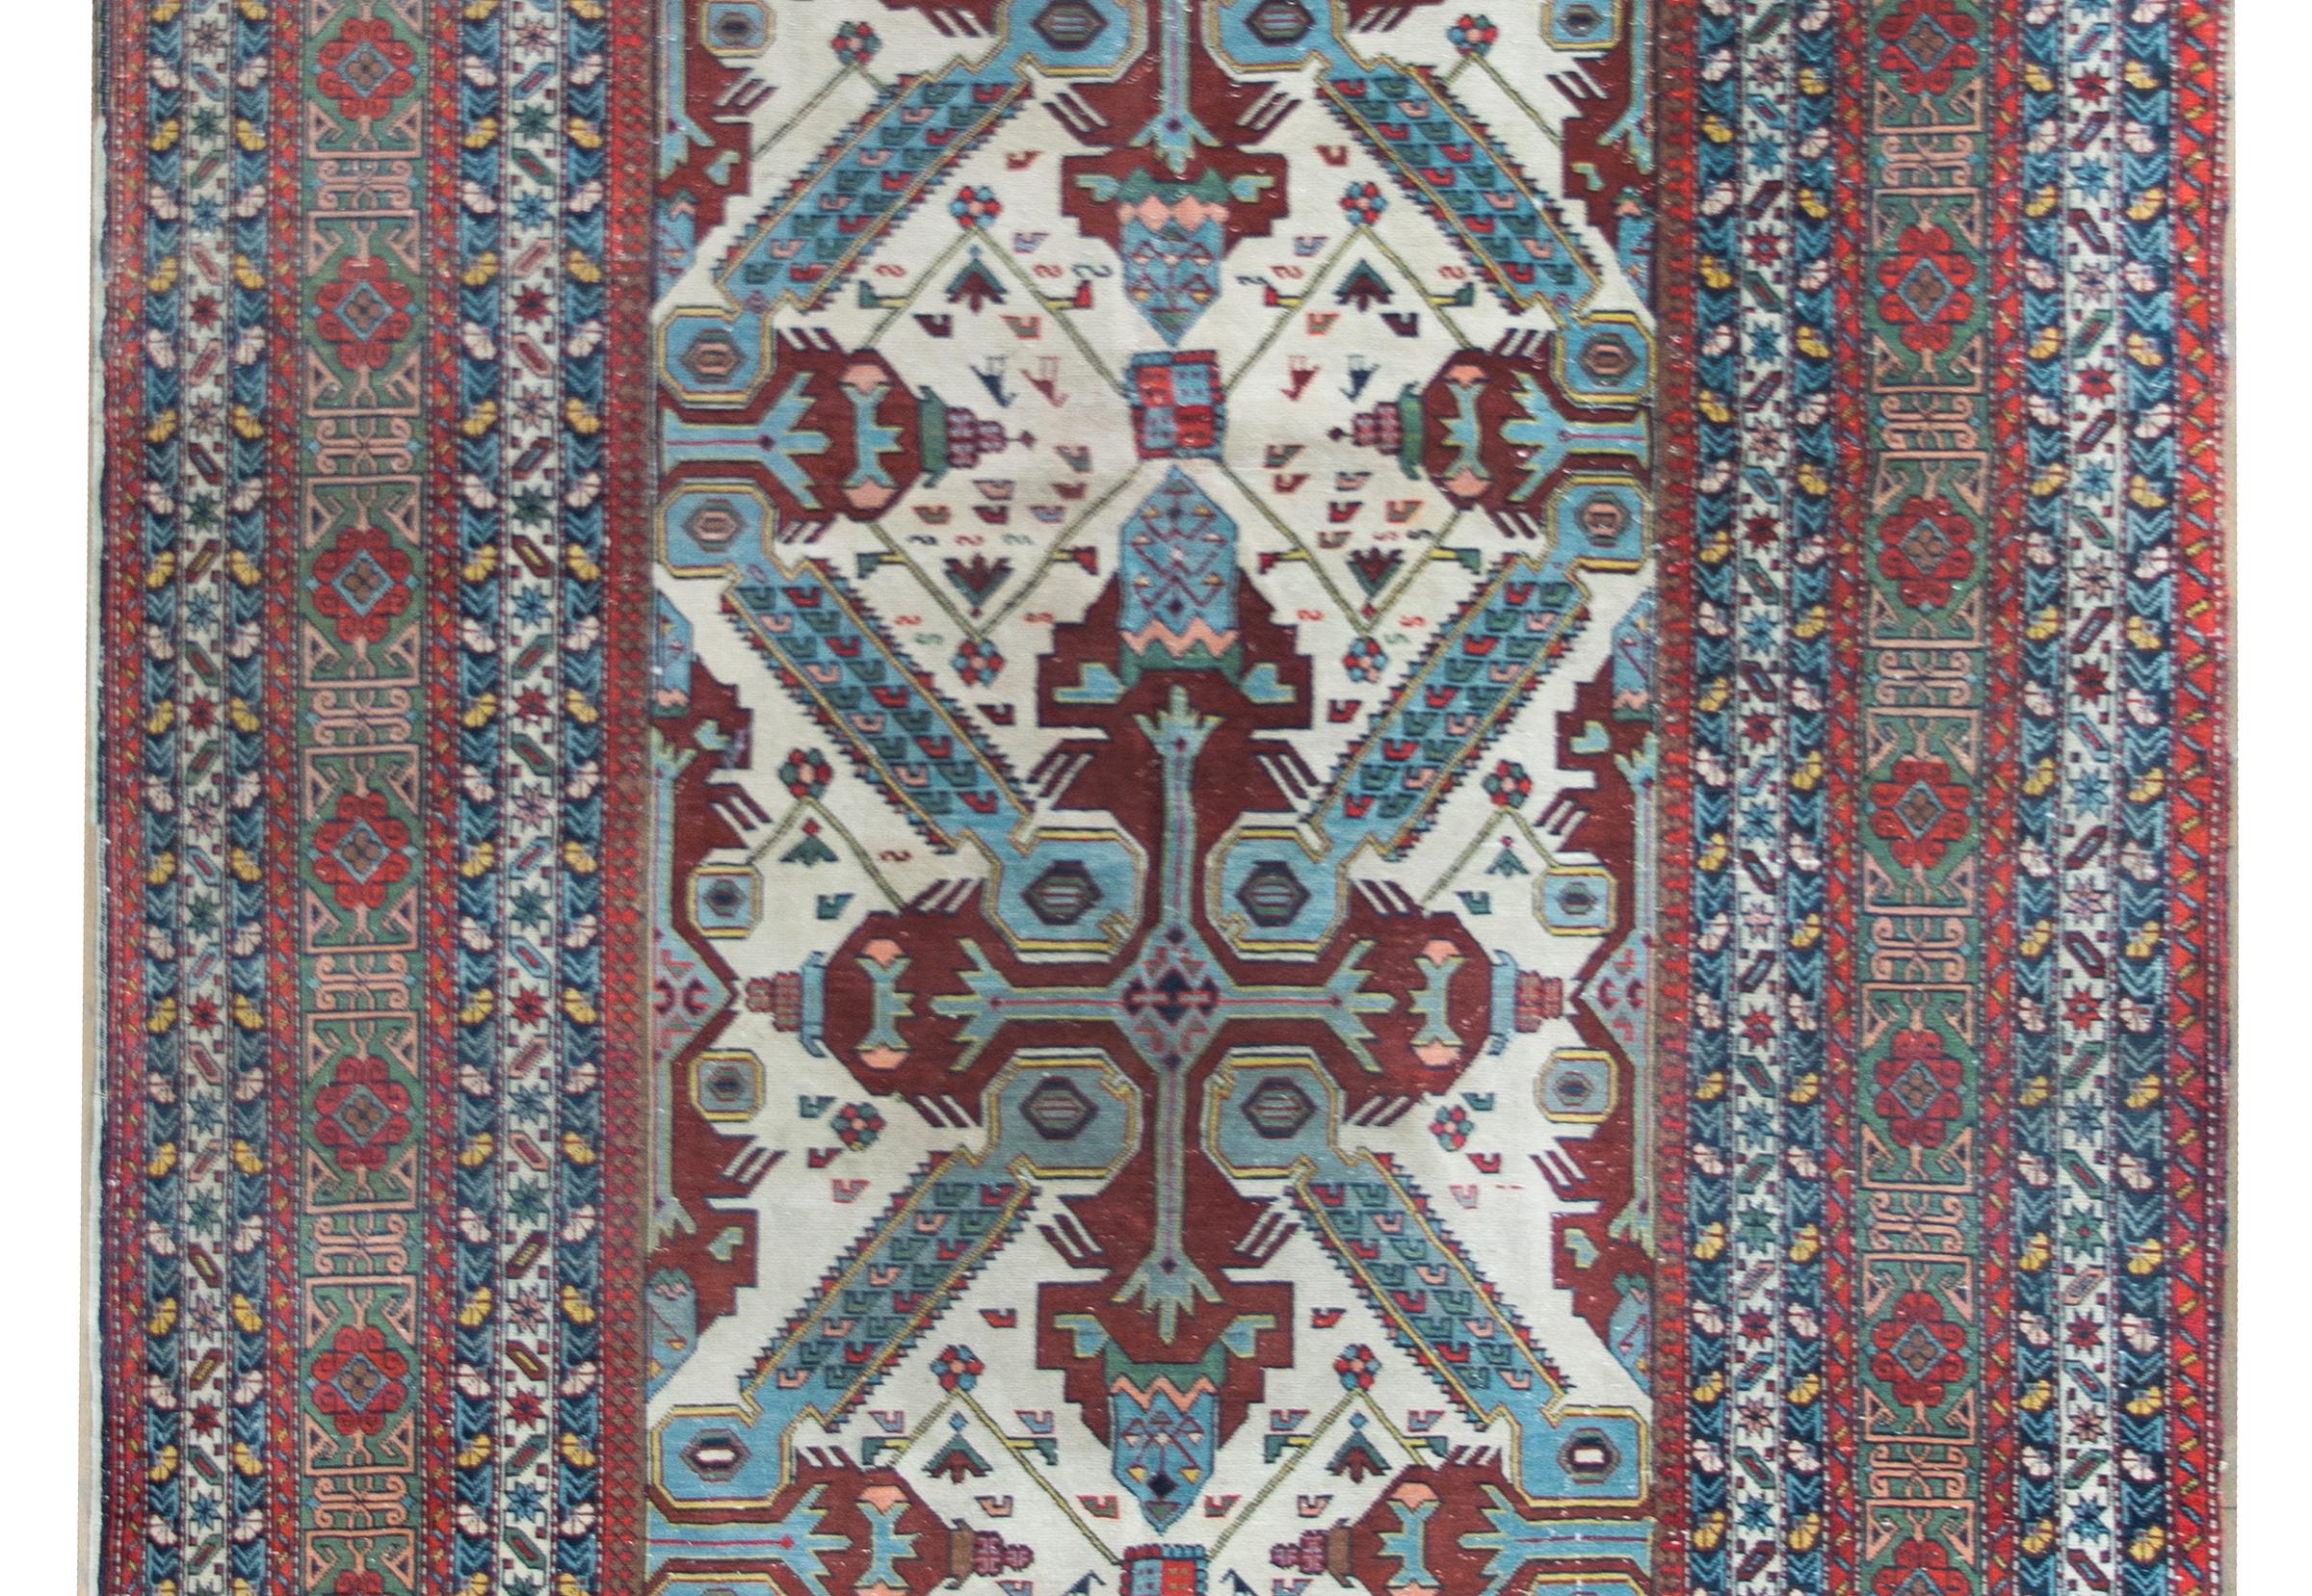 An incredible early 20th century Persian Ardabil rug with a wonderful tribal pattern containing two large medallion with stylized leaves and flowers living amidst a field of petite flowers, and surrounded by a robust complex border composed of